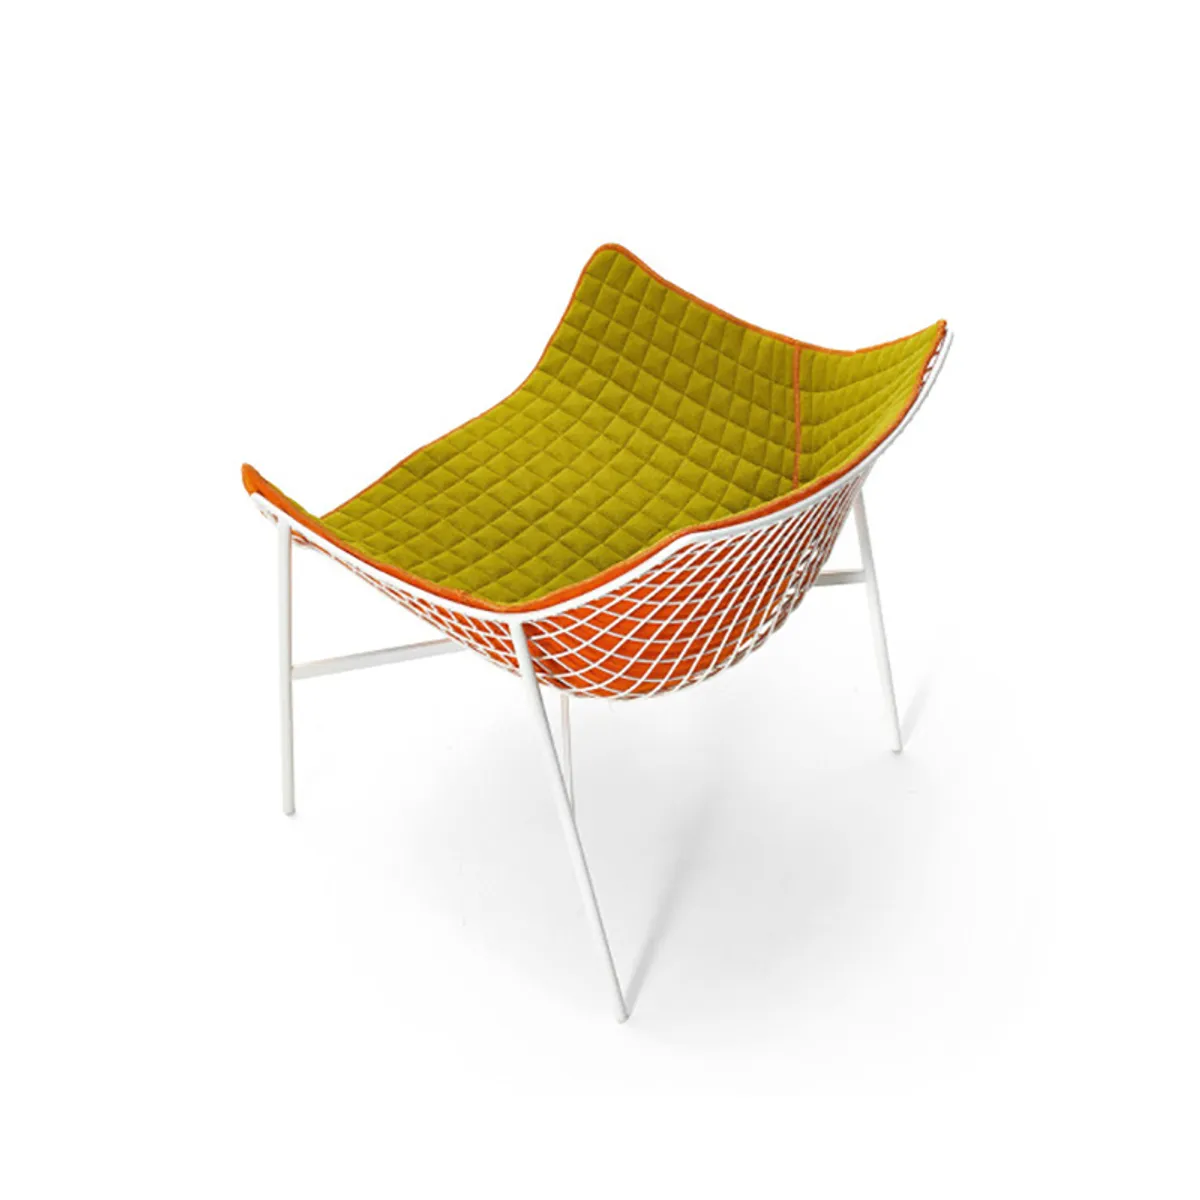 Summer White Metal Lounge Chair With Orange And Green Seat Pad For Outside Bars And Restaurants 070